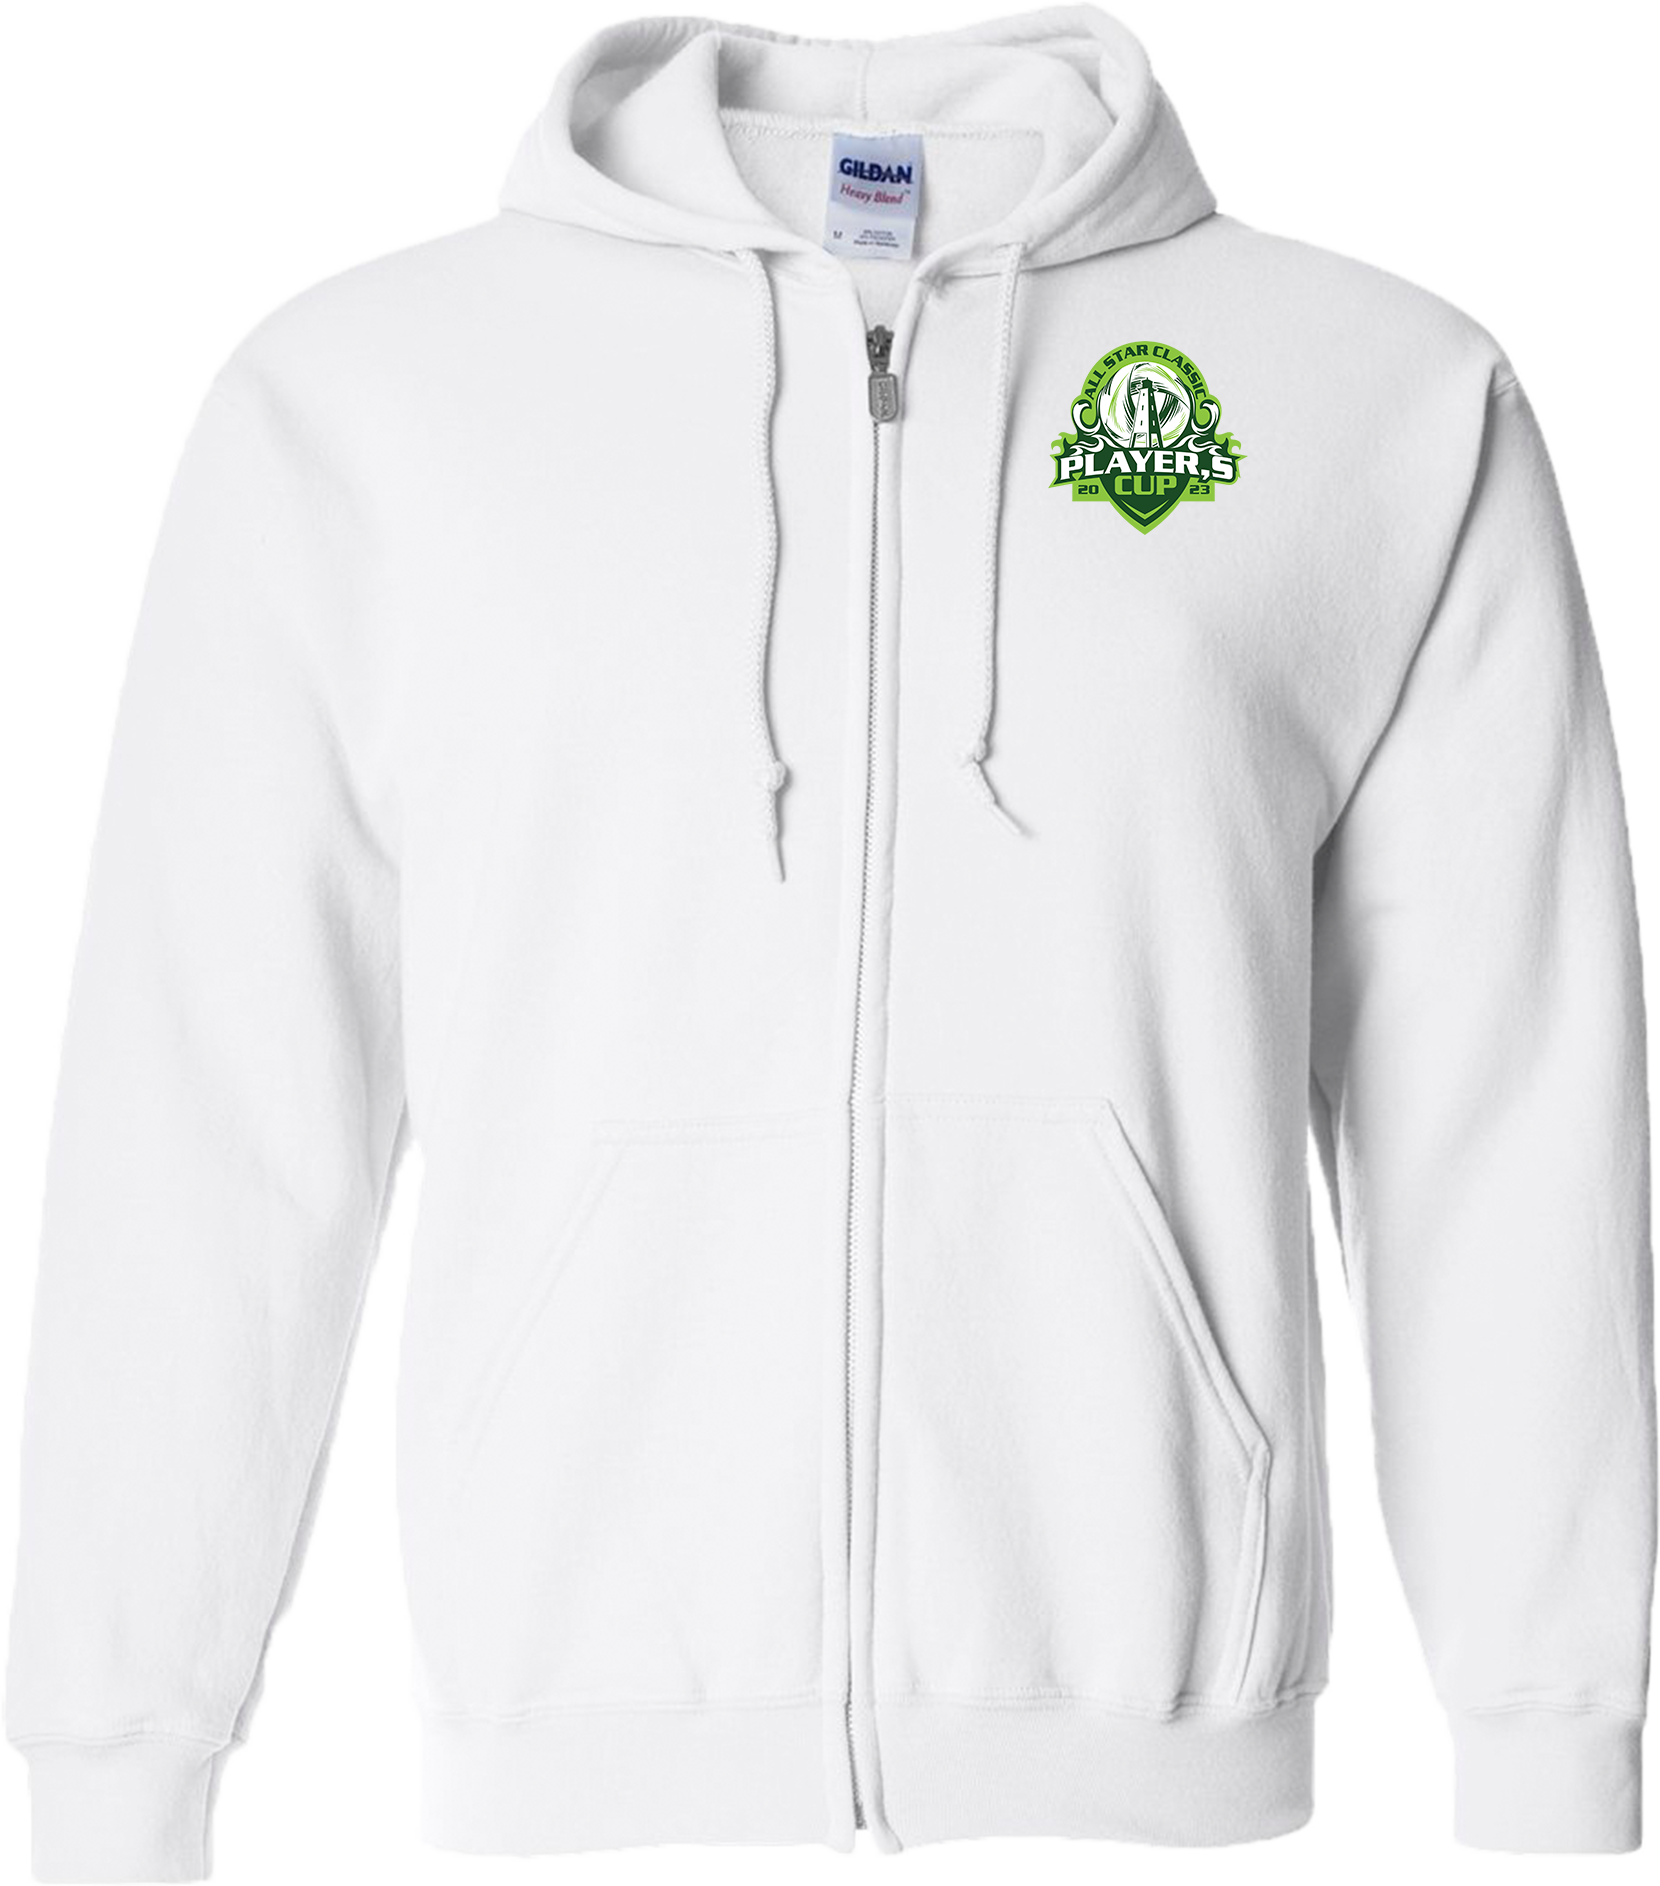 FULL ZIP HOODIES - 2023 Players Cup All Star Classic